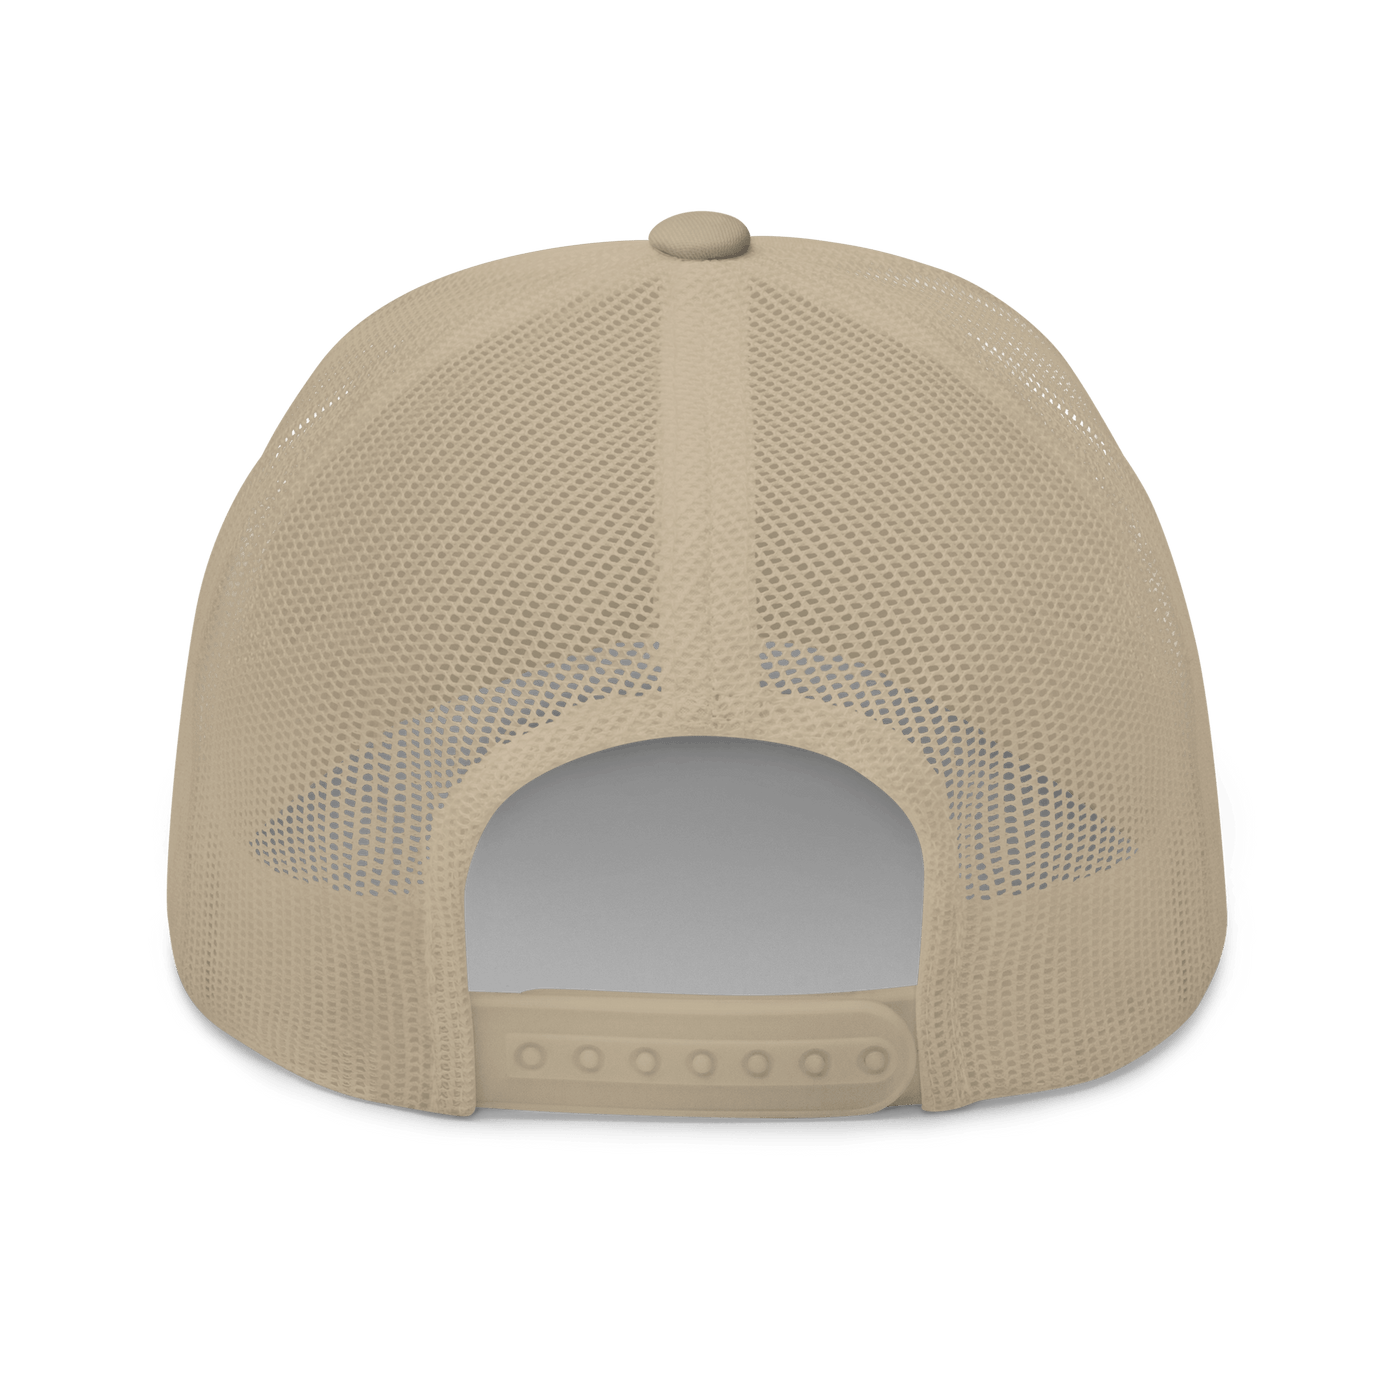 Take me to rave Trucker Cap - Khaki - - Just Another Cap Store